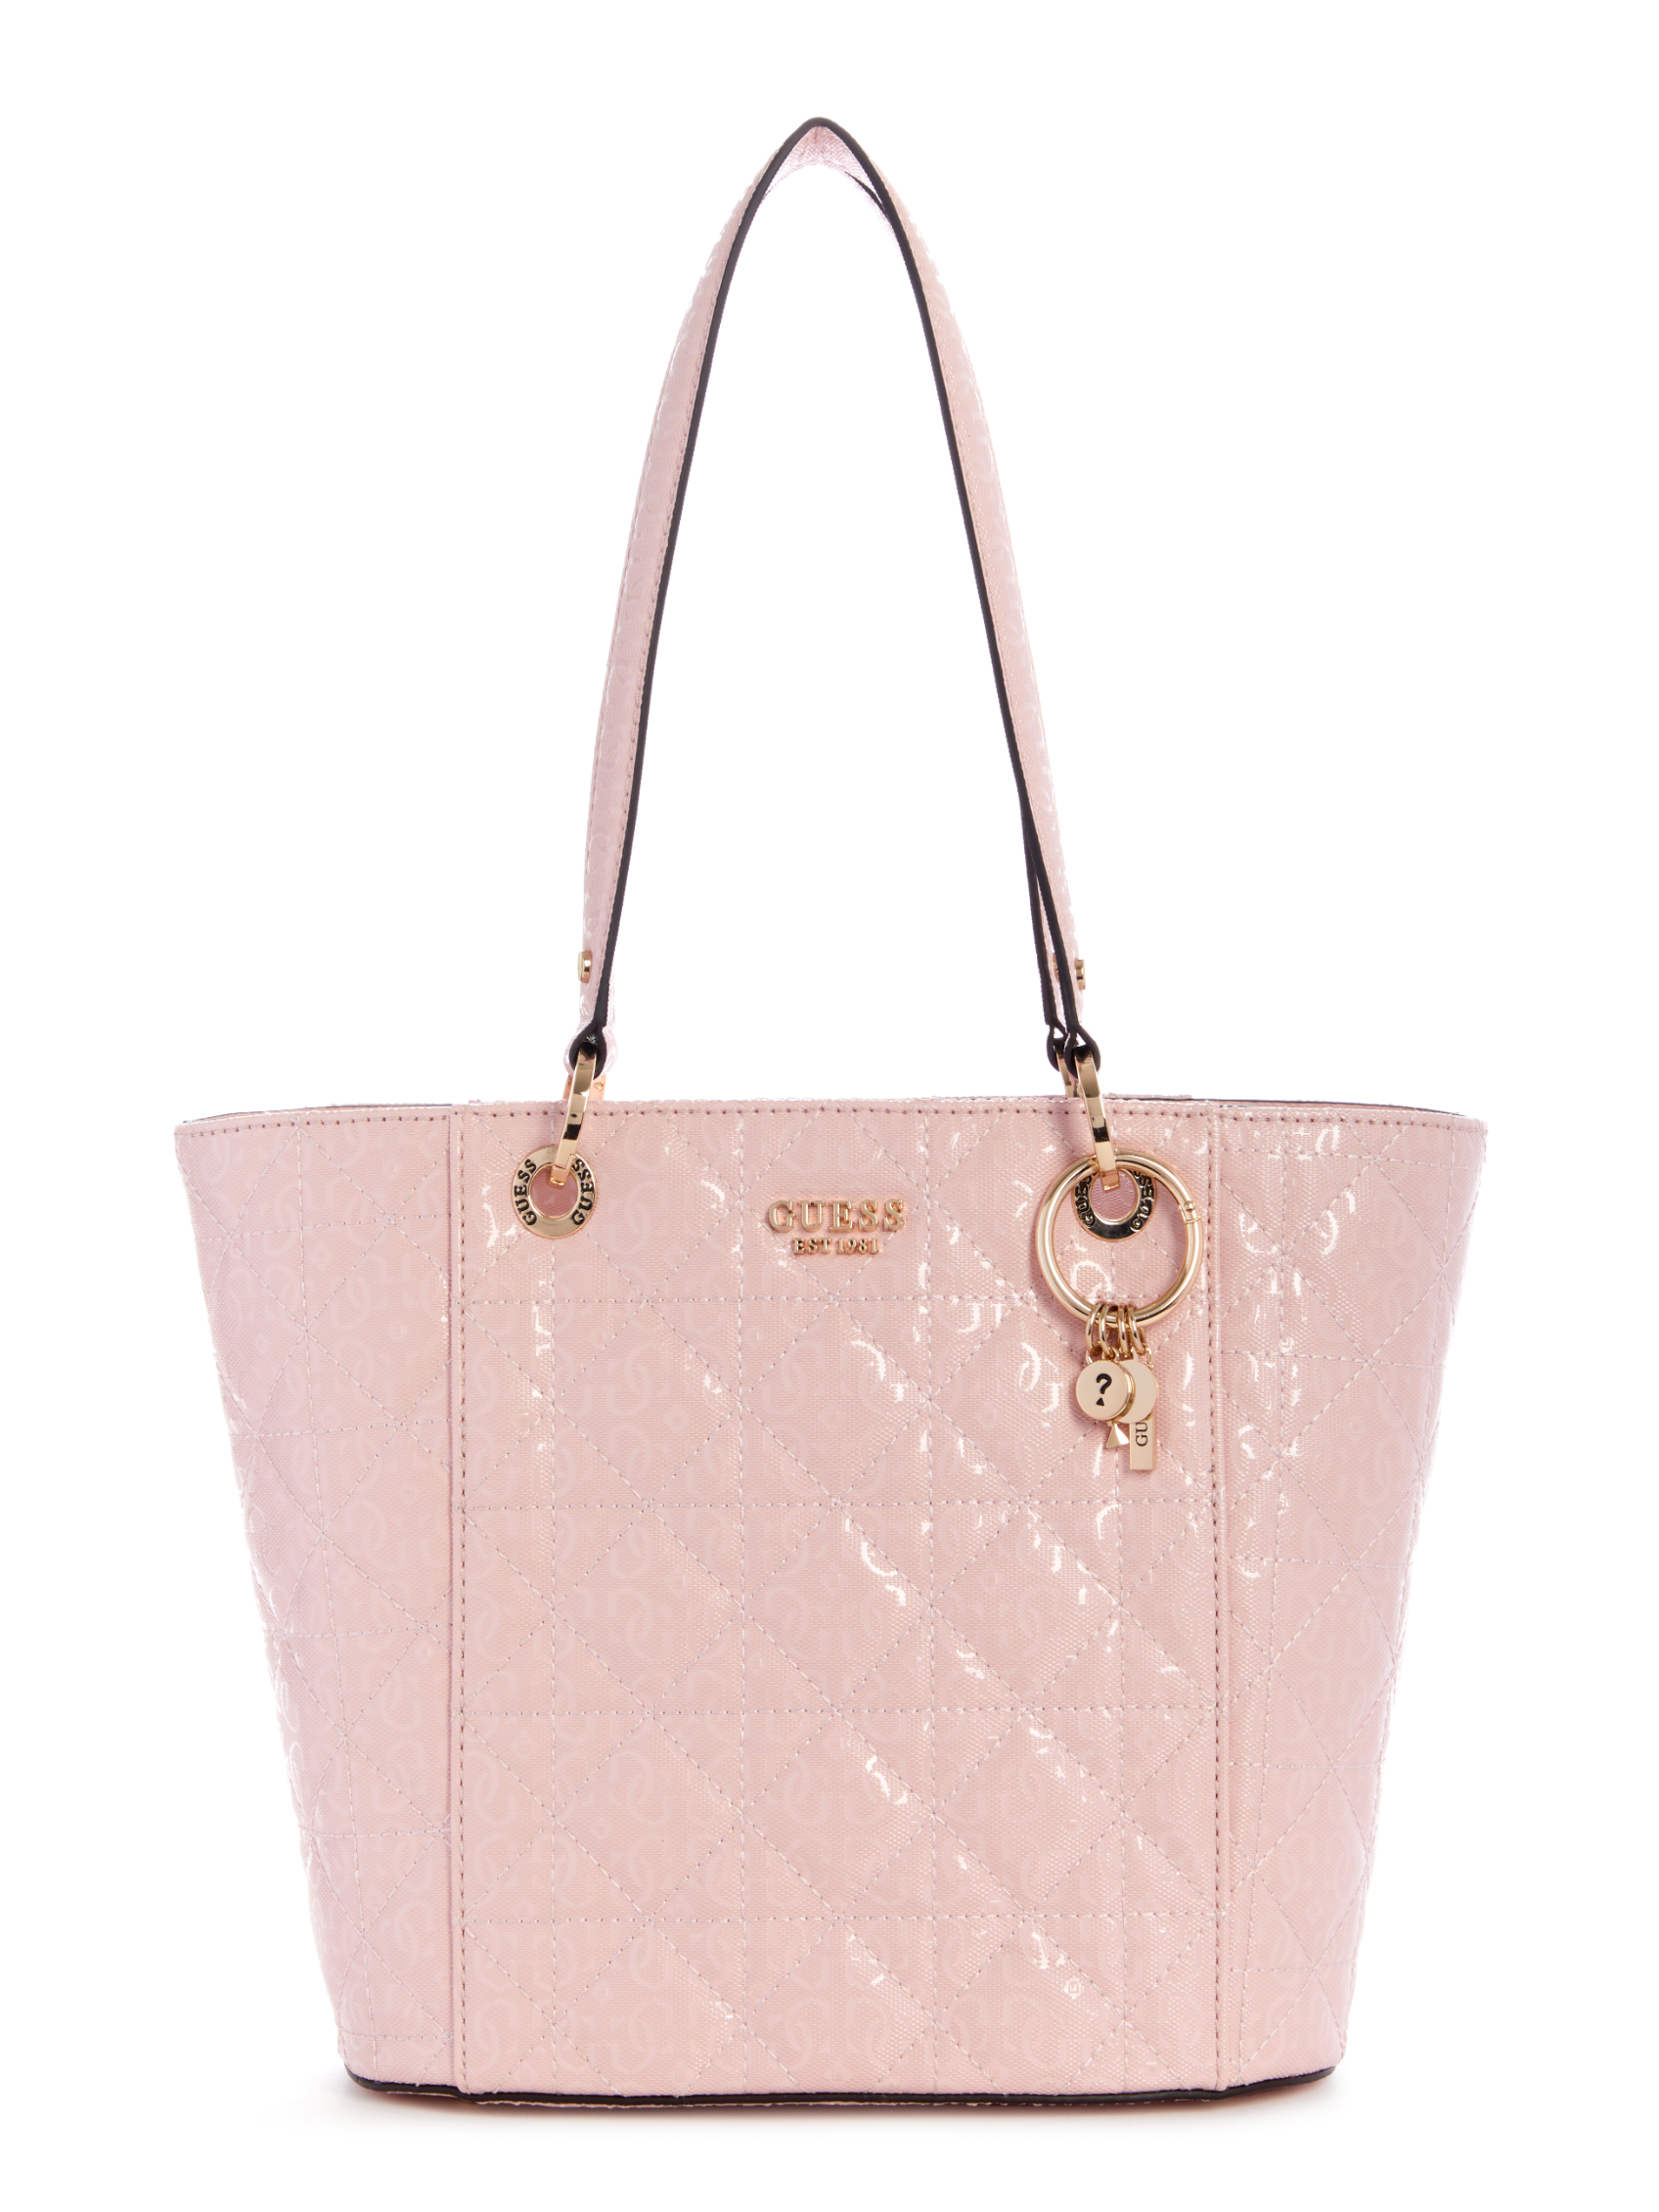 NOELLE SMALL ELITE TOTE | Guess Philippines